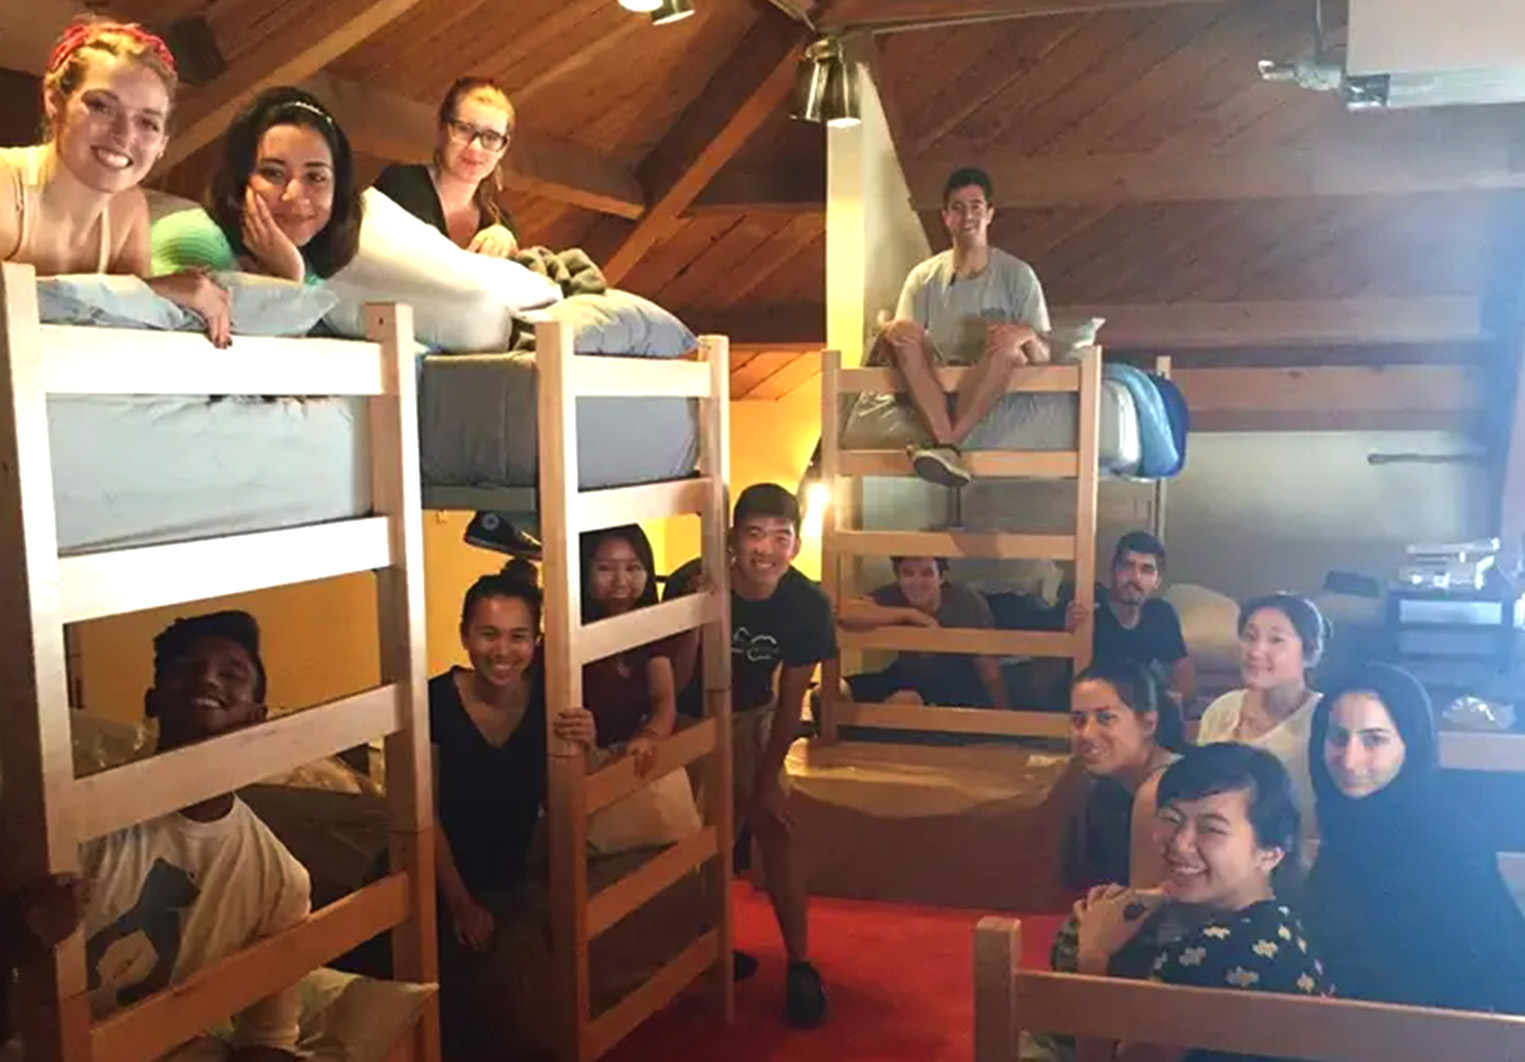 College is so expensive, this 27-year-old rocket scientist created a homeless shelter for students